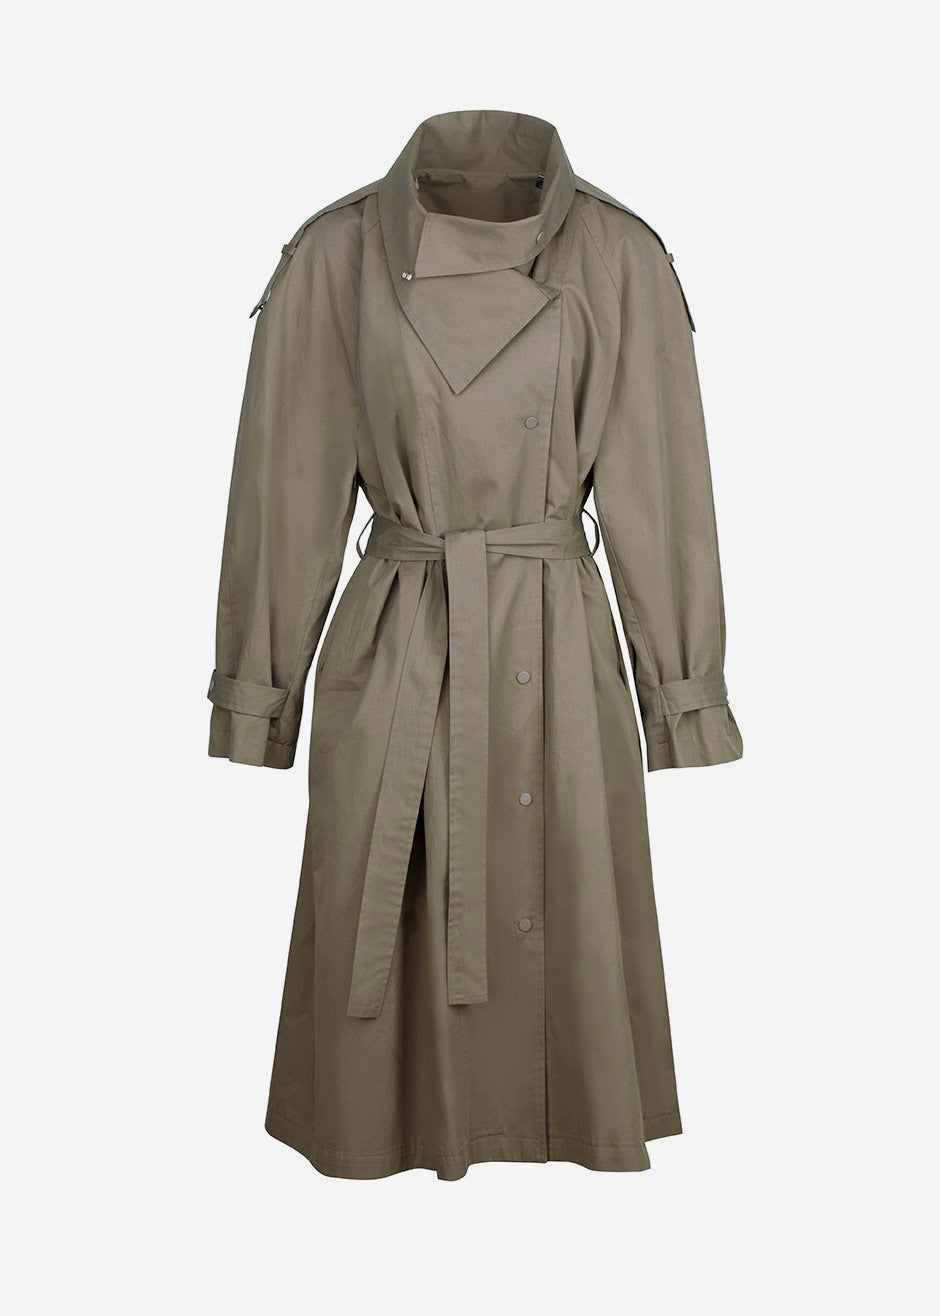 Lottie Wing Collar Trench Coat - Olive - 8